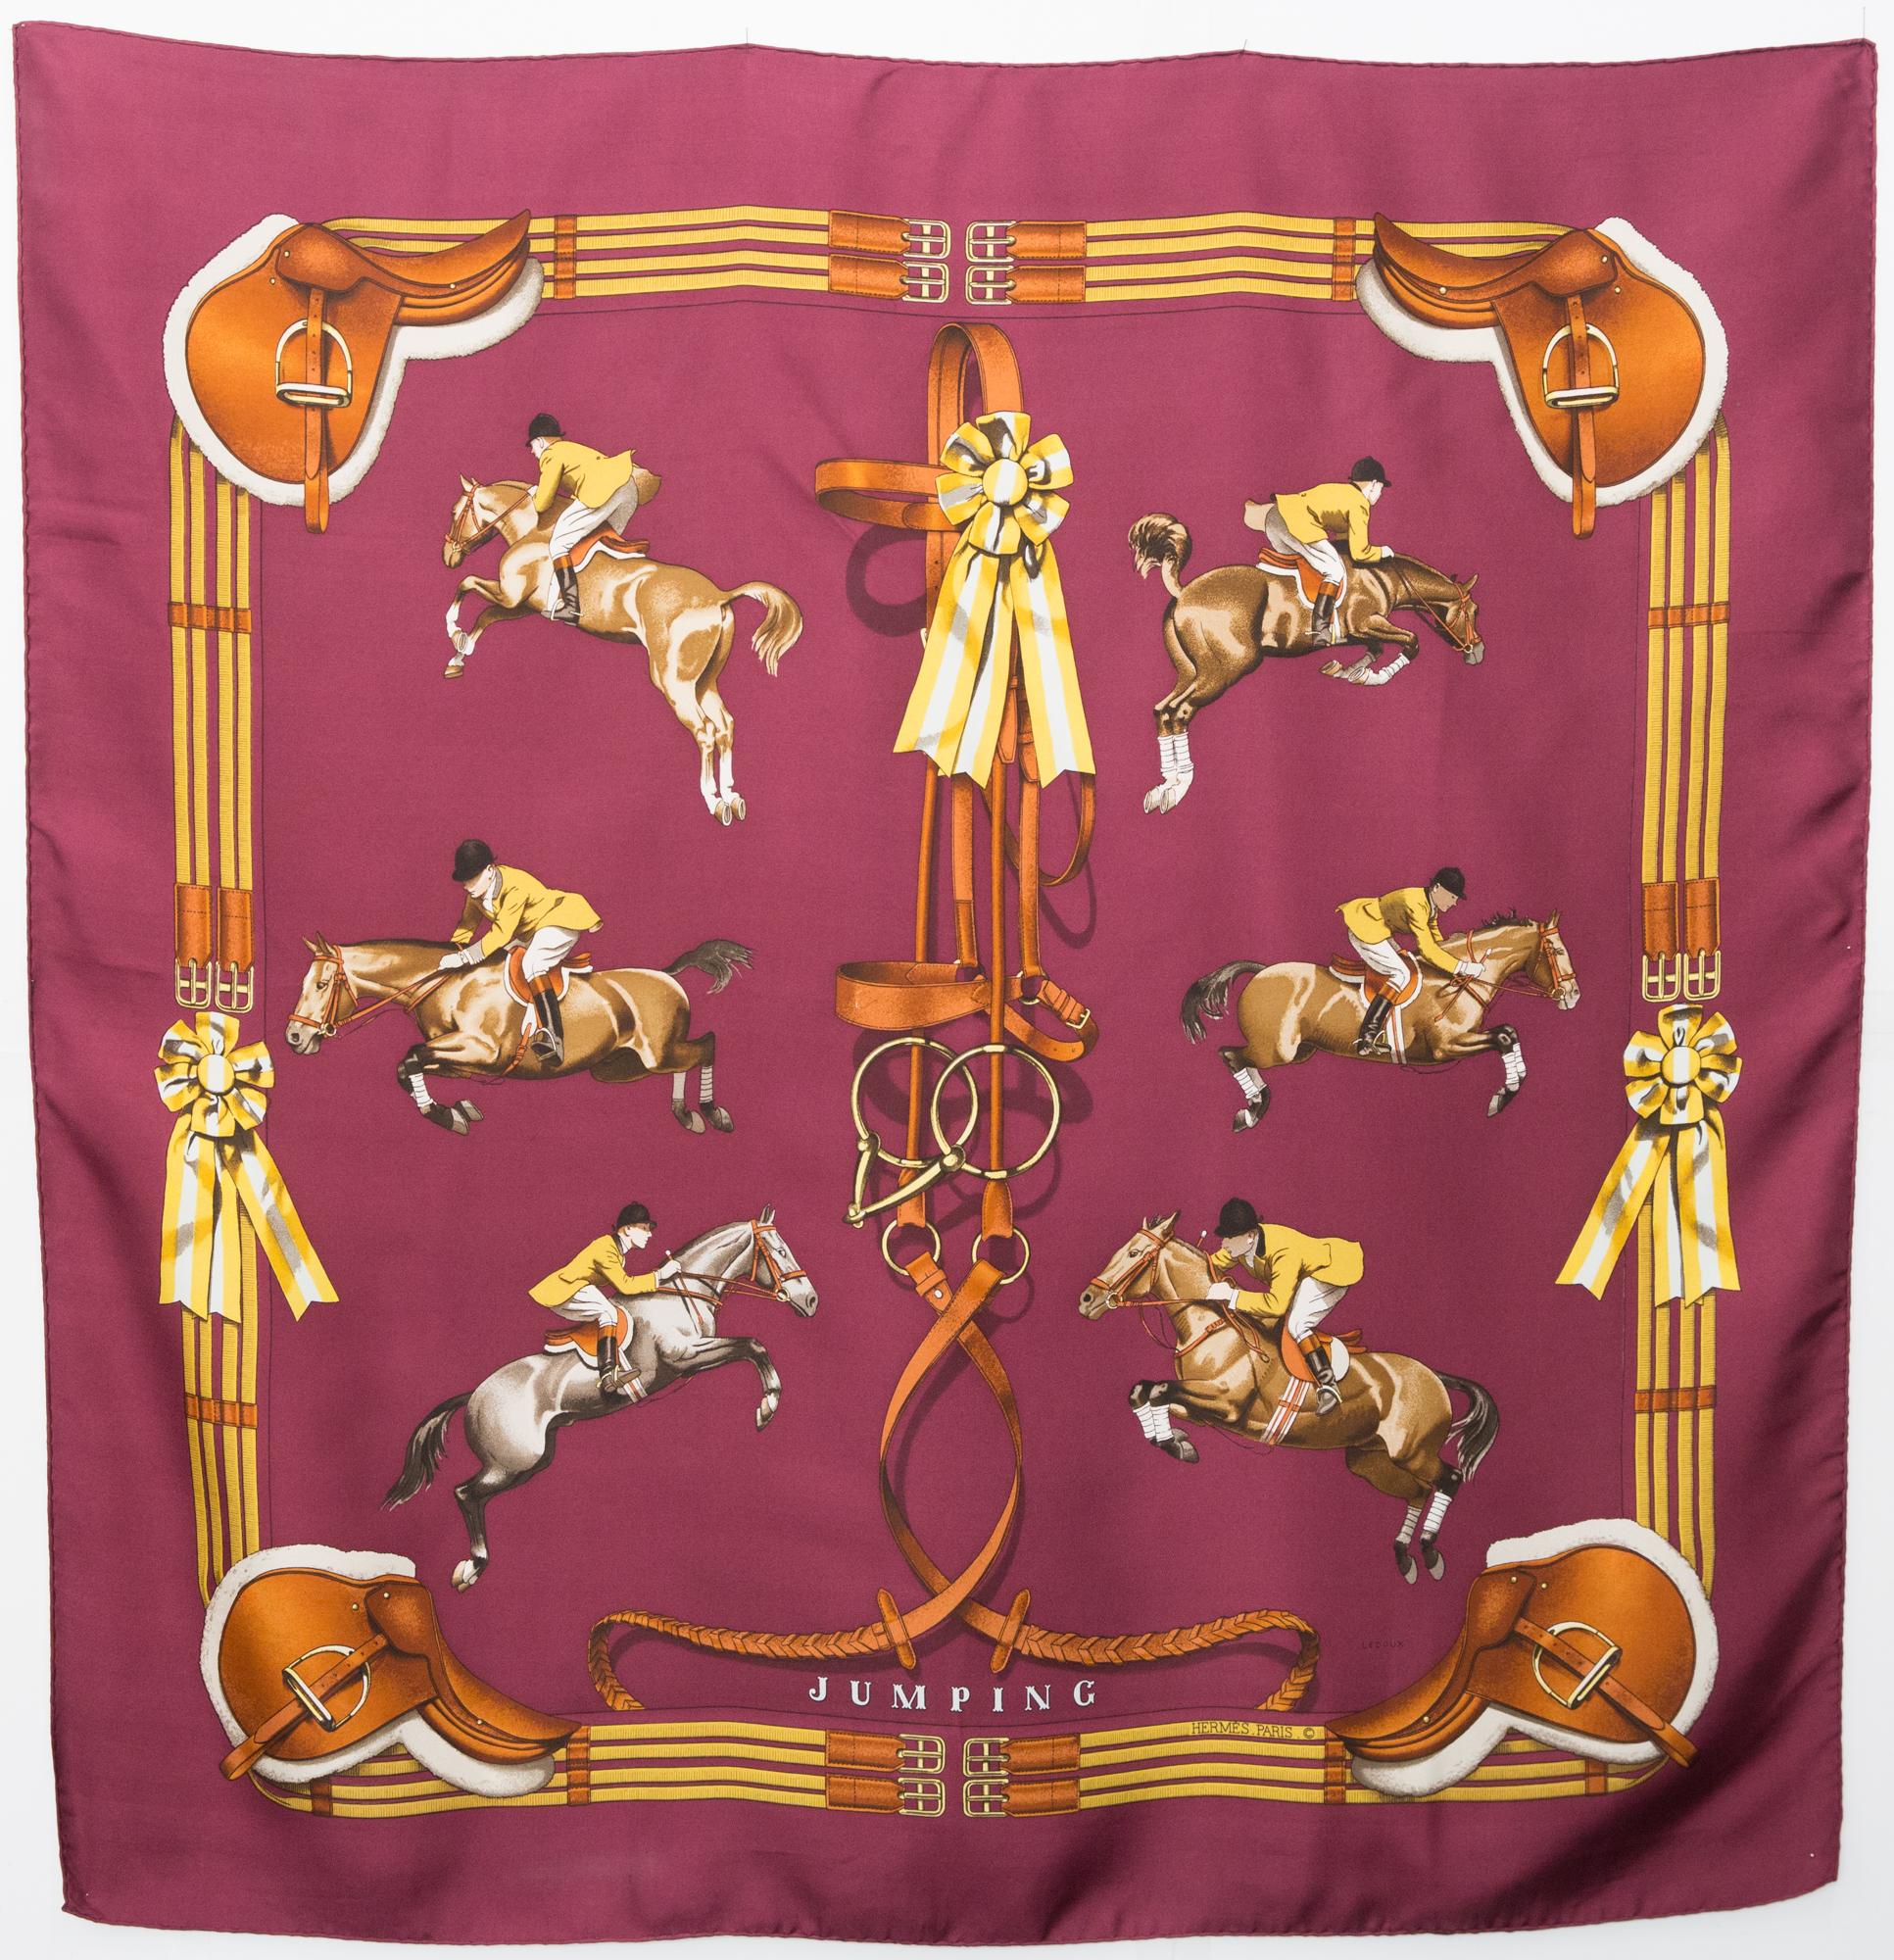 Women's or Men's Hermes Bordeaux Jumping by Philippe Ledoux Silk Scarf